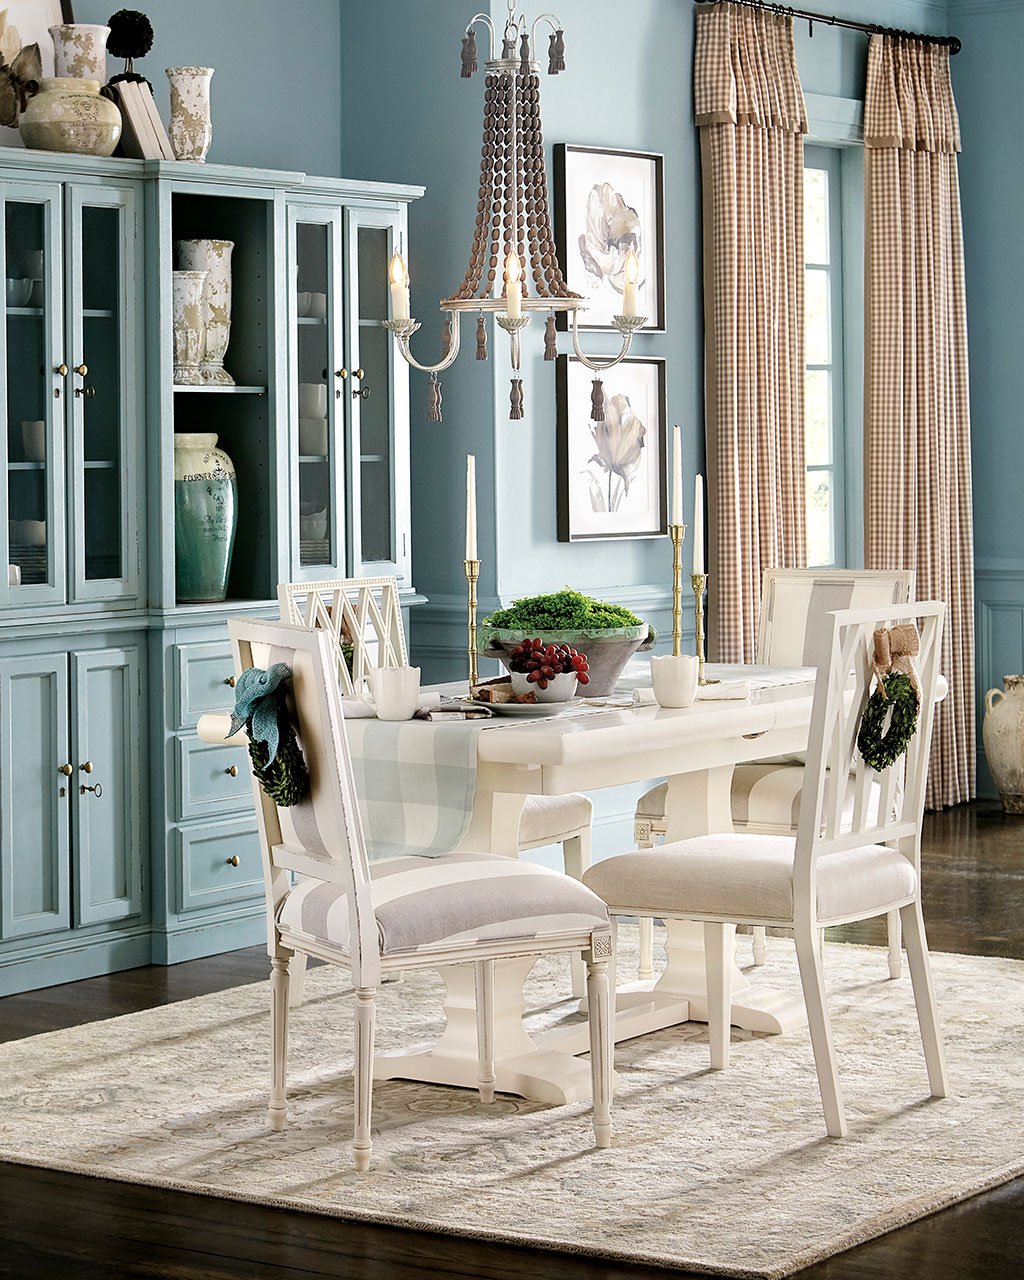 How To Select The Right Size Dining Room Chandelier How To Decorate